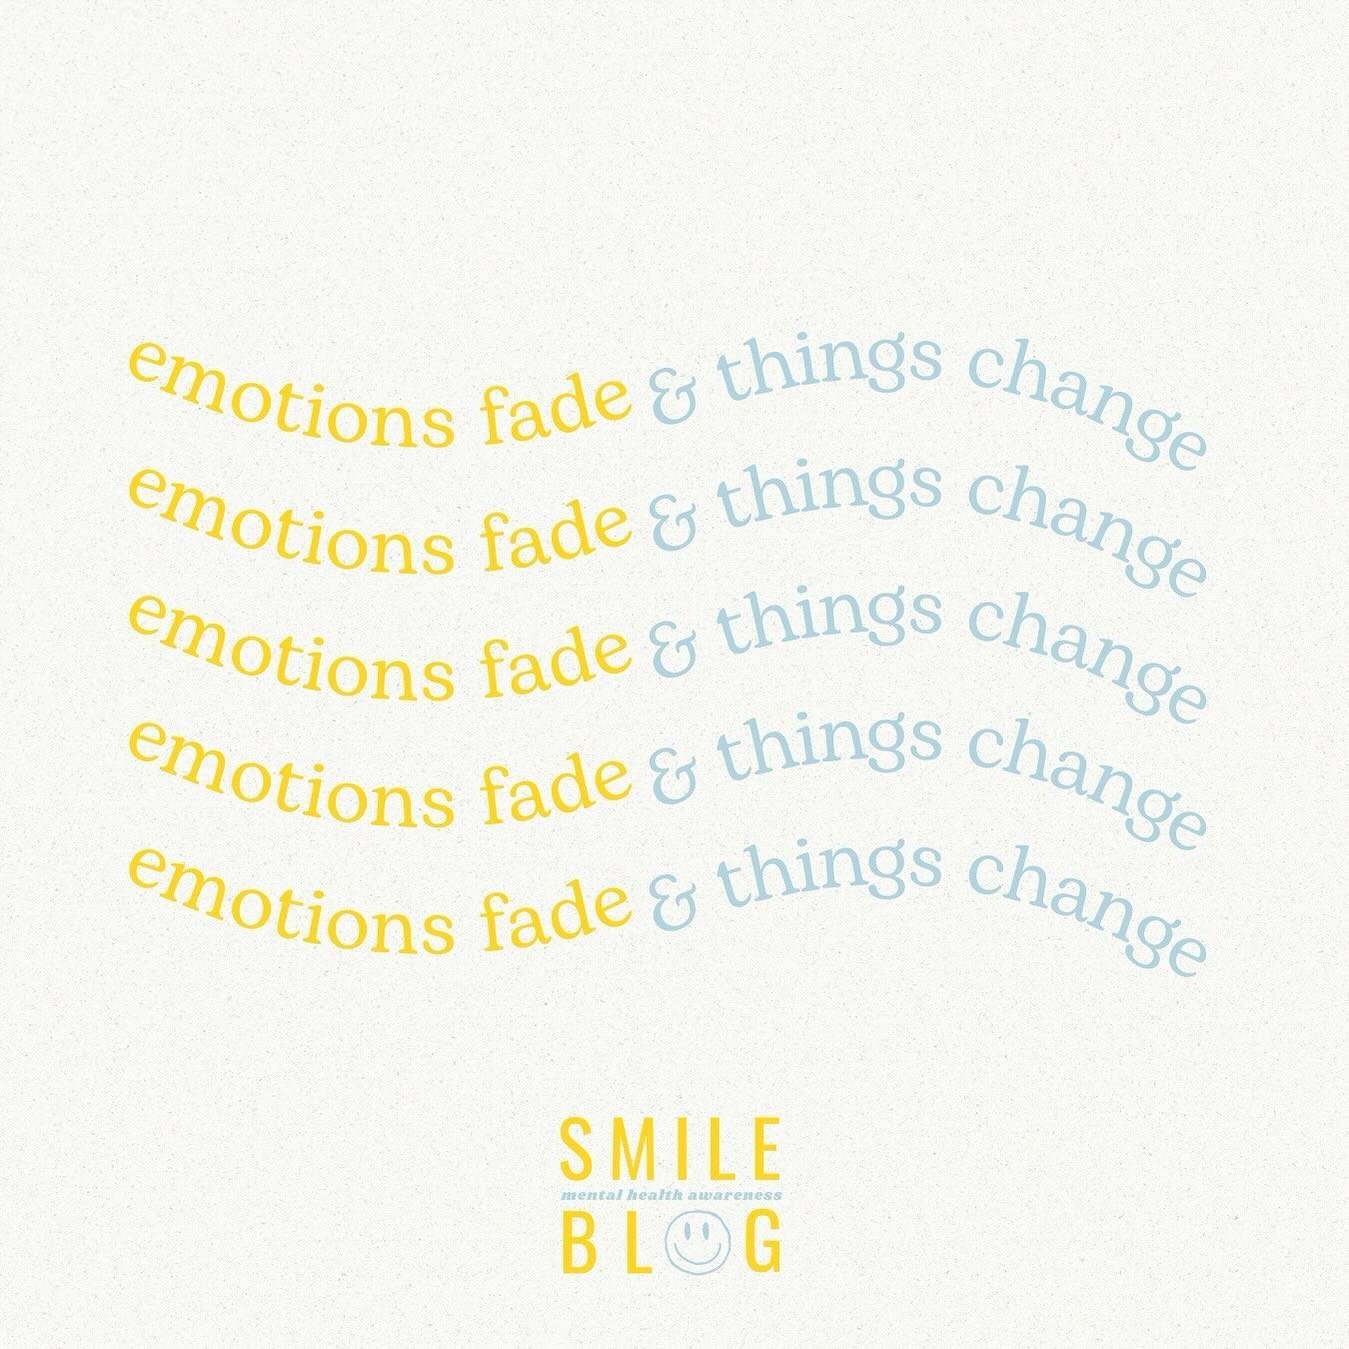 A daily reminder: Emotions fade &amp; things change. 

Have a great day⚡️🩵😁 
.
.
.
.
.
Want to learn more about us? Check us out @ mhsmileblog.com. Link is in bio

#selfcare #awareness #mentalhealthawareness #mentalhealthmatters #blog #happy #depre